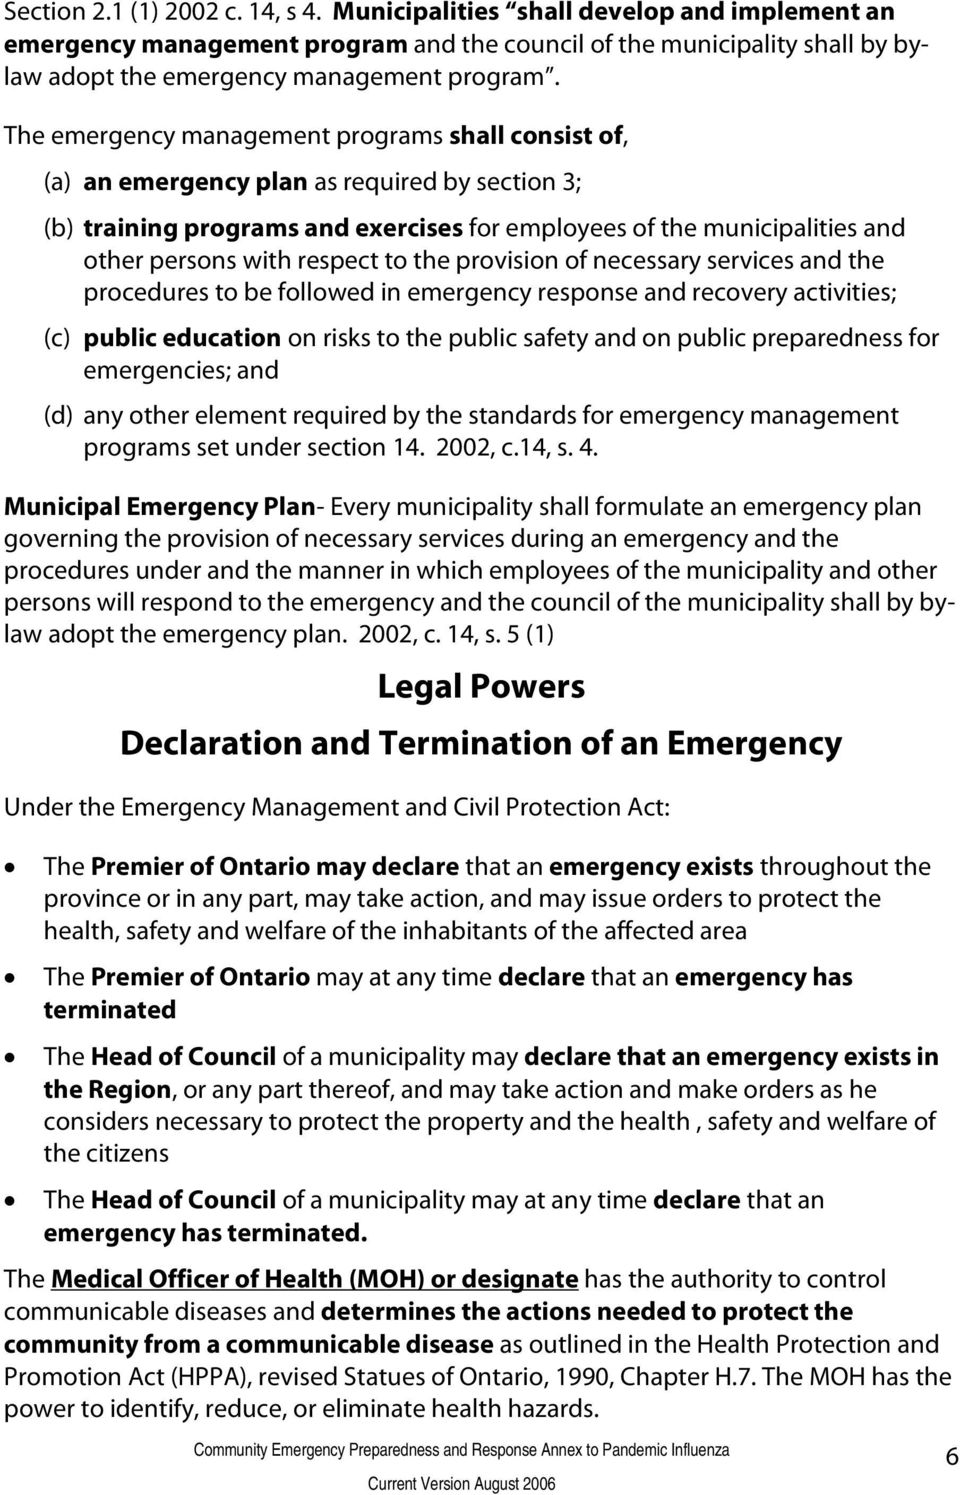 respect to the provision of necessary services and the procedures to be followed in emergency response and recovery activities; (c) public education on risks to the public safety and on public